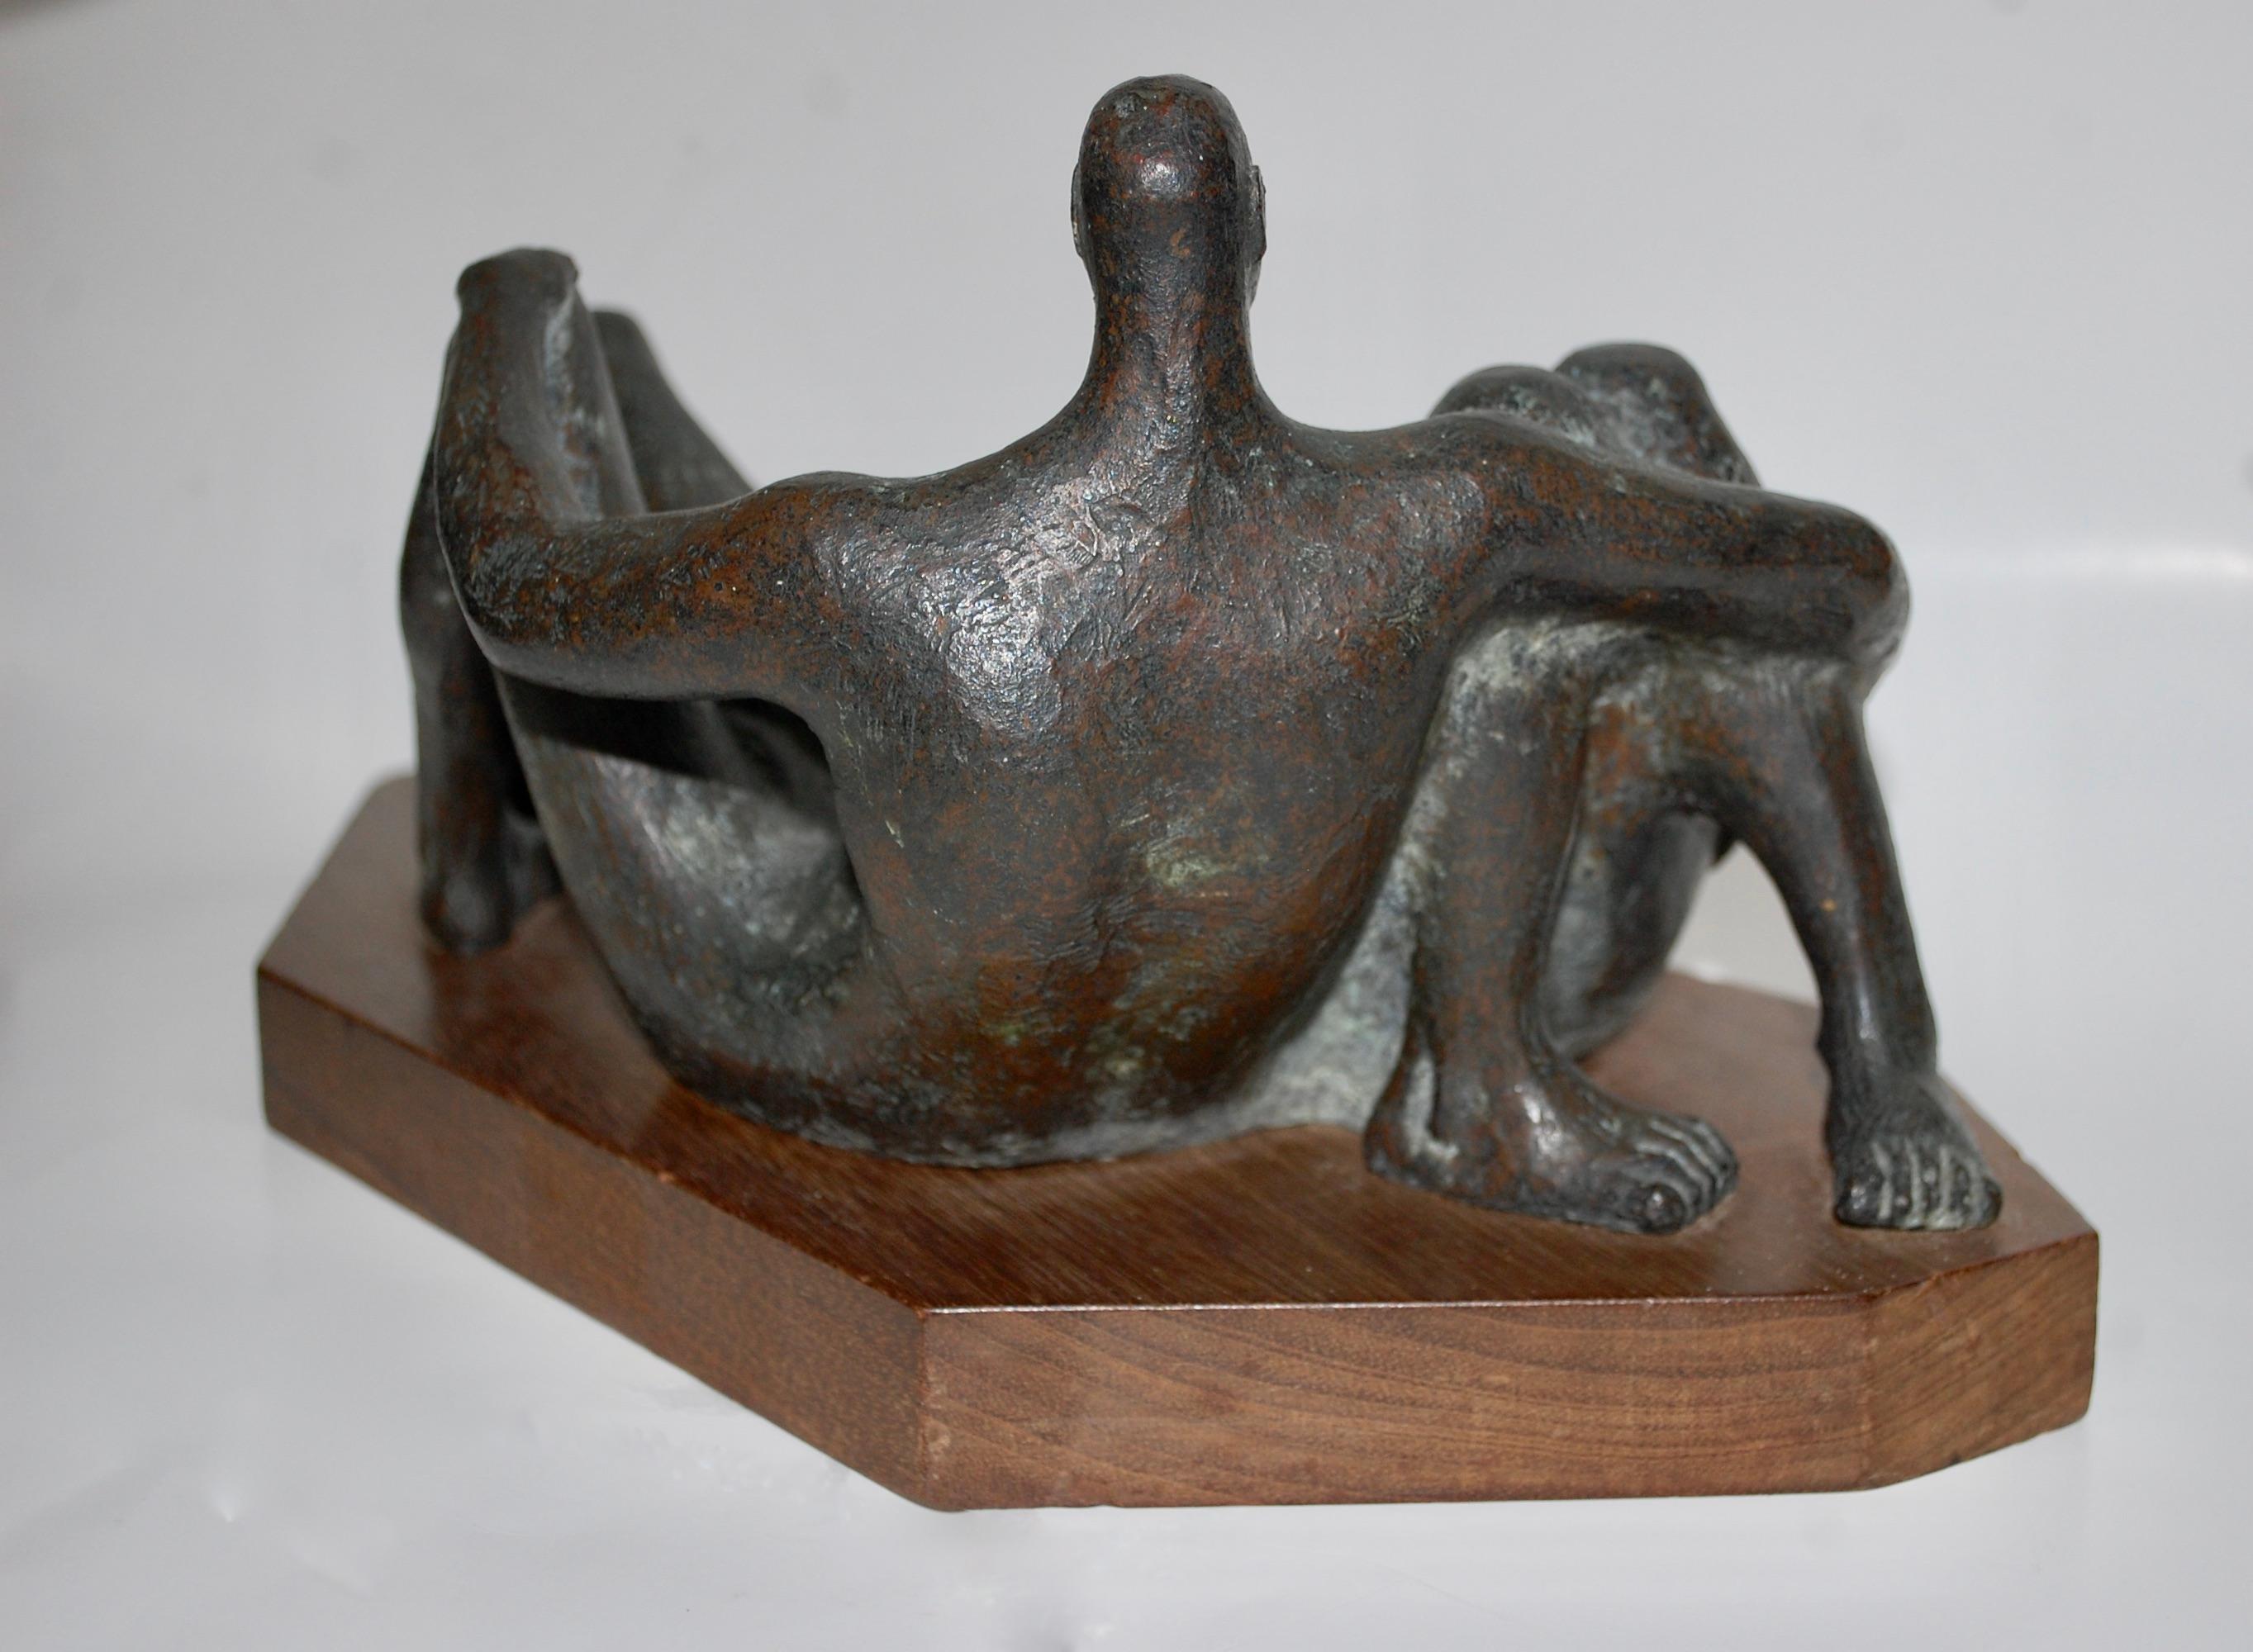 Lovers Woman and Man Nude
Modern Bronze sculpture on wooden base, signed, number 2/3
Sculptor Armando Amaya was born in Mexico City in 1935, He studied at the National School of Painting and Sculpture under Jose Ruiz and Francisco Zuñiga. Later, he